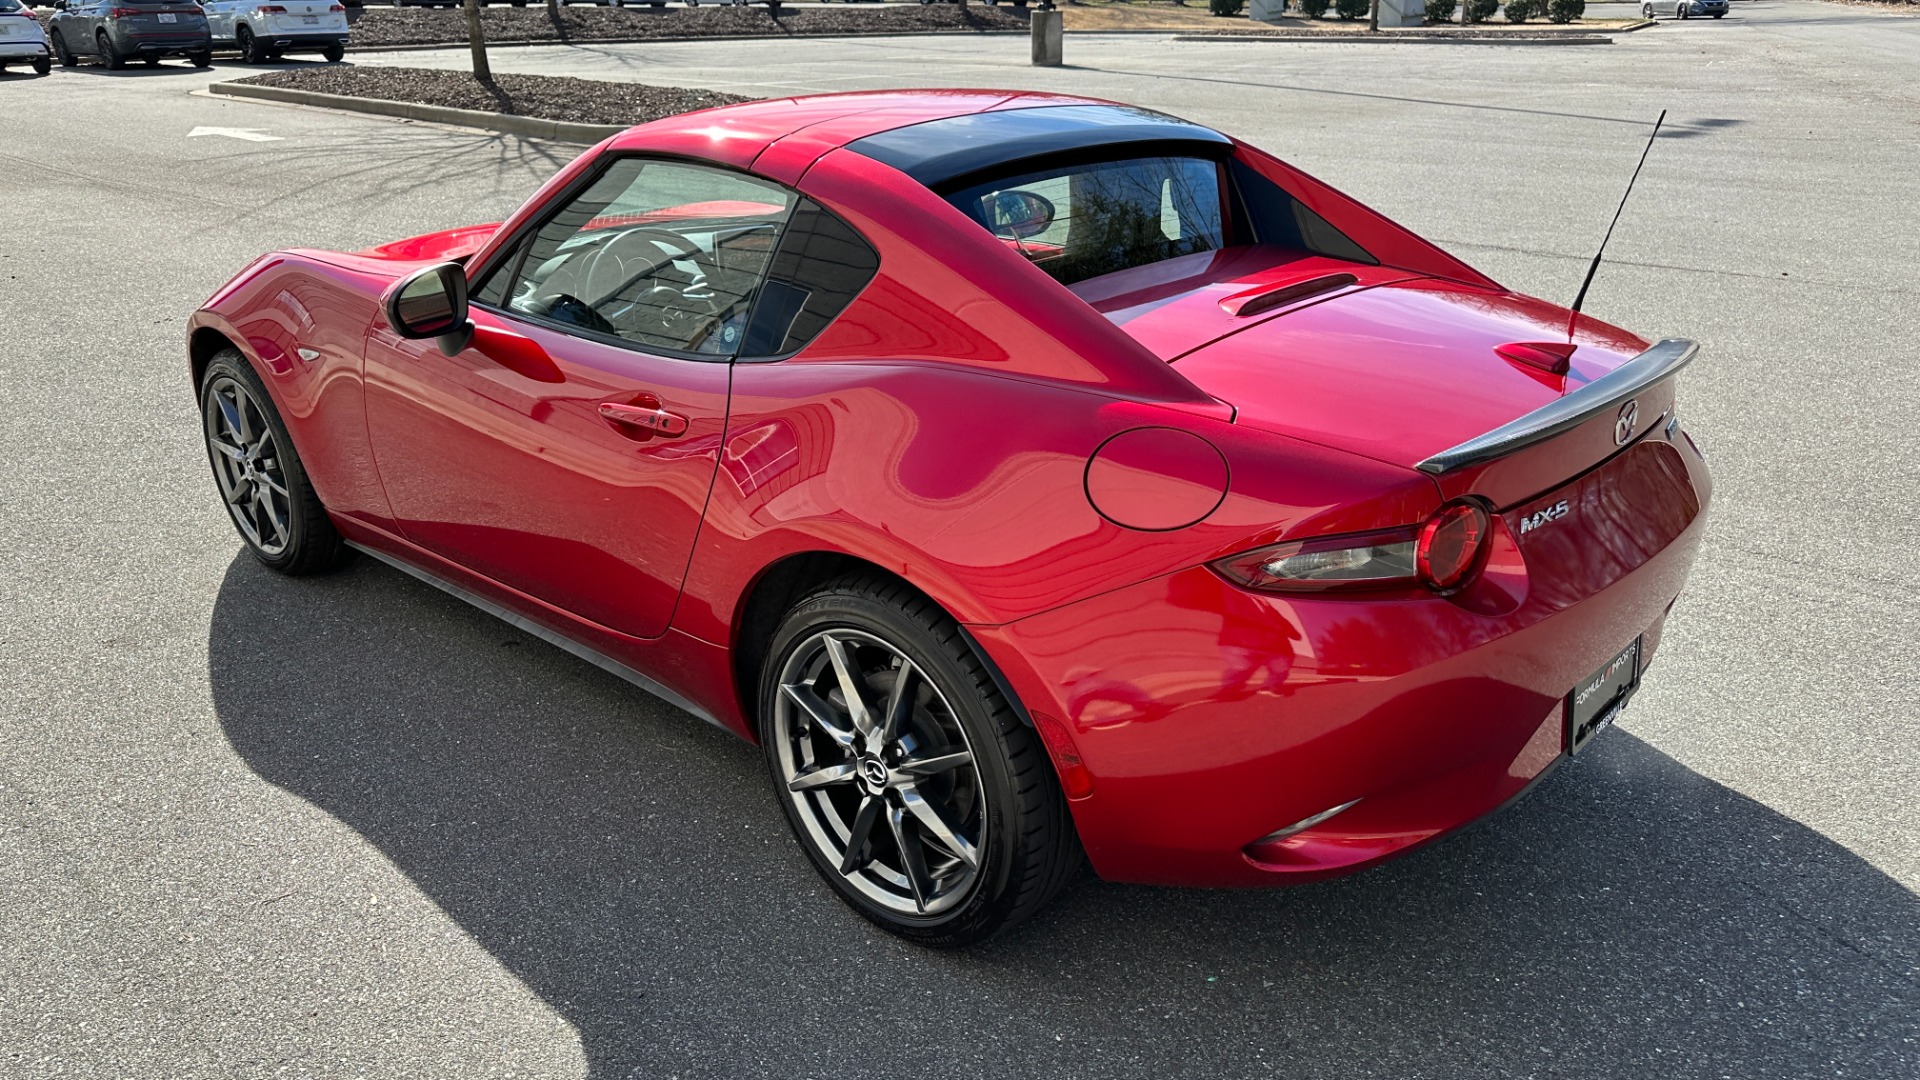 Used 2017 Mazda MX-5 Miata RF GRAND TOURING / POWER HARD TOP CONVERTIBLE / AUTOMATIC for sale $22,995 at Formula Imports in Charlotte NC 28227 8